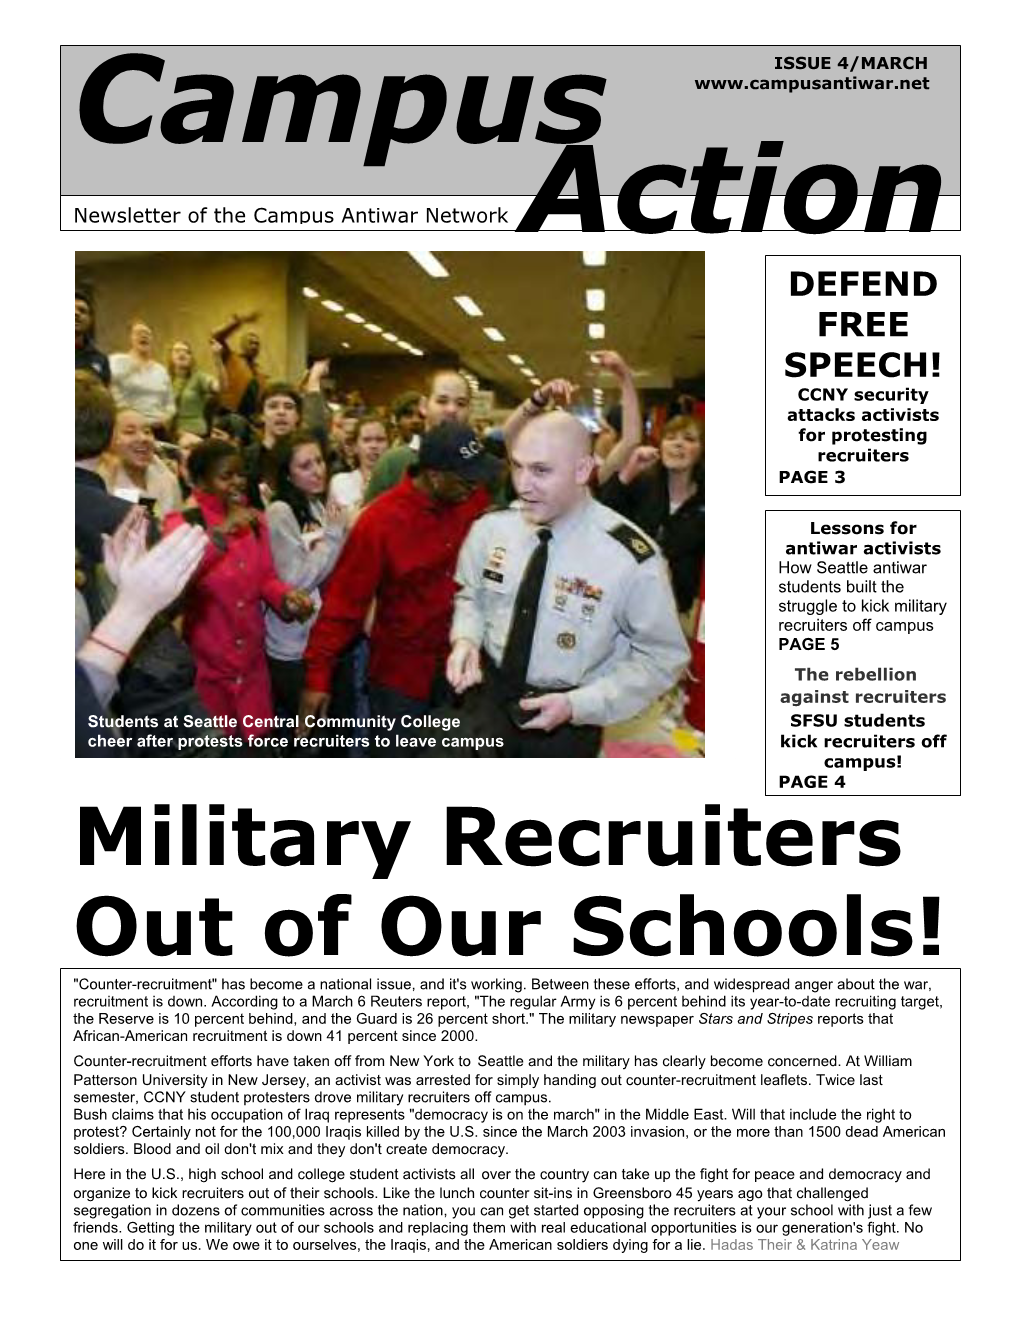 Military Recruiters out of Our Schools!